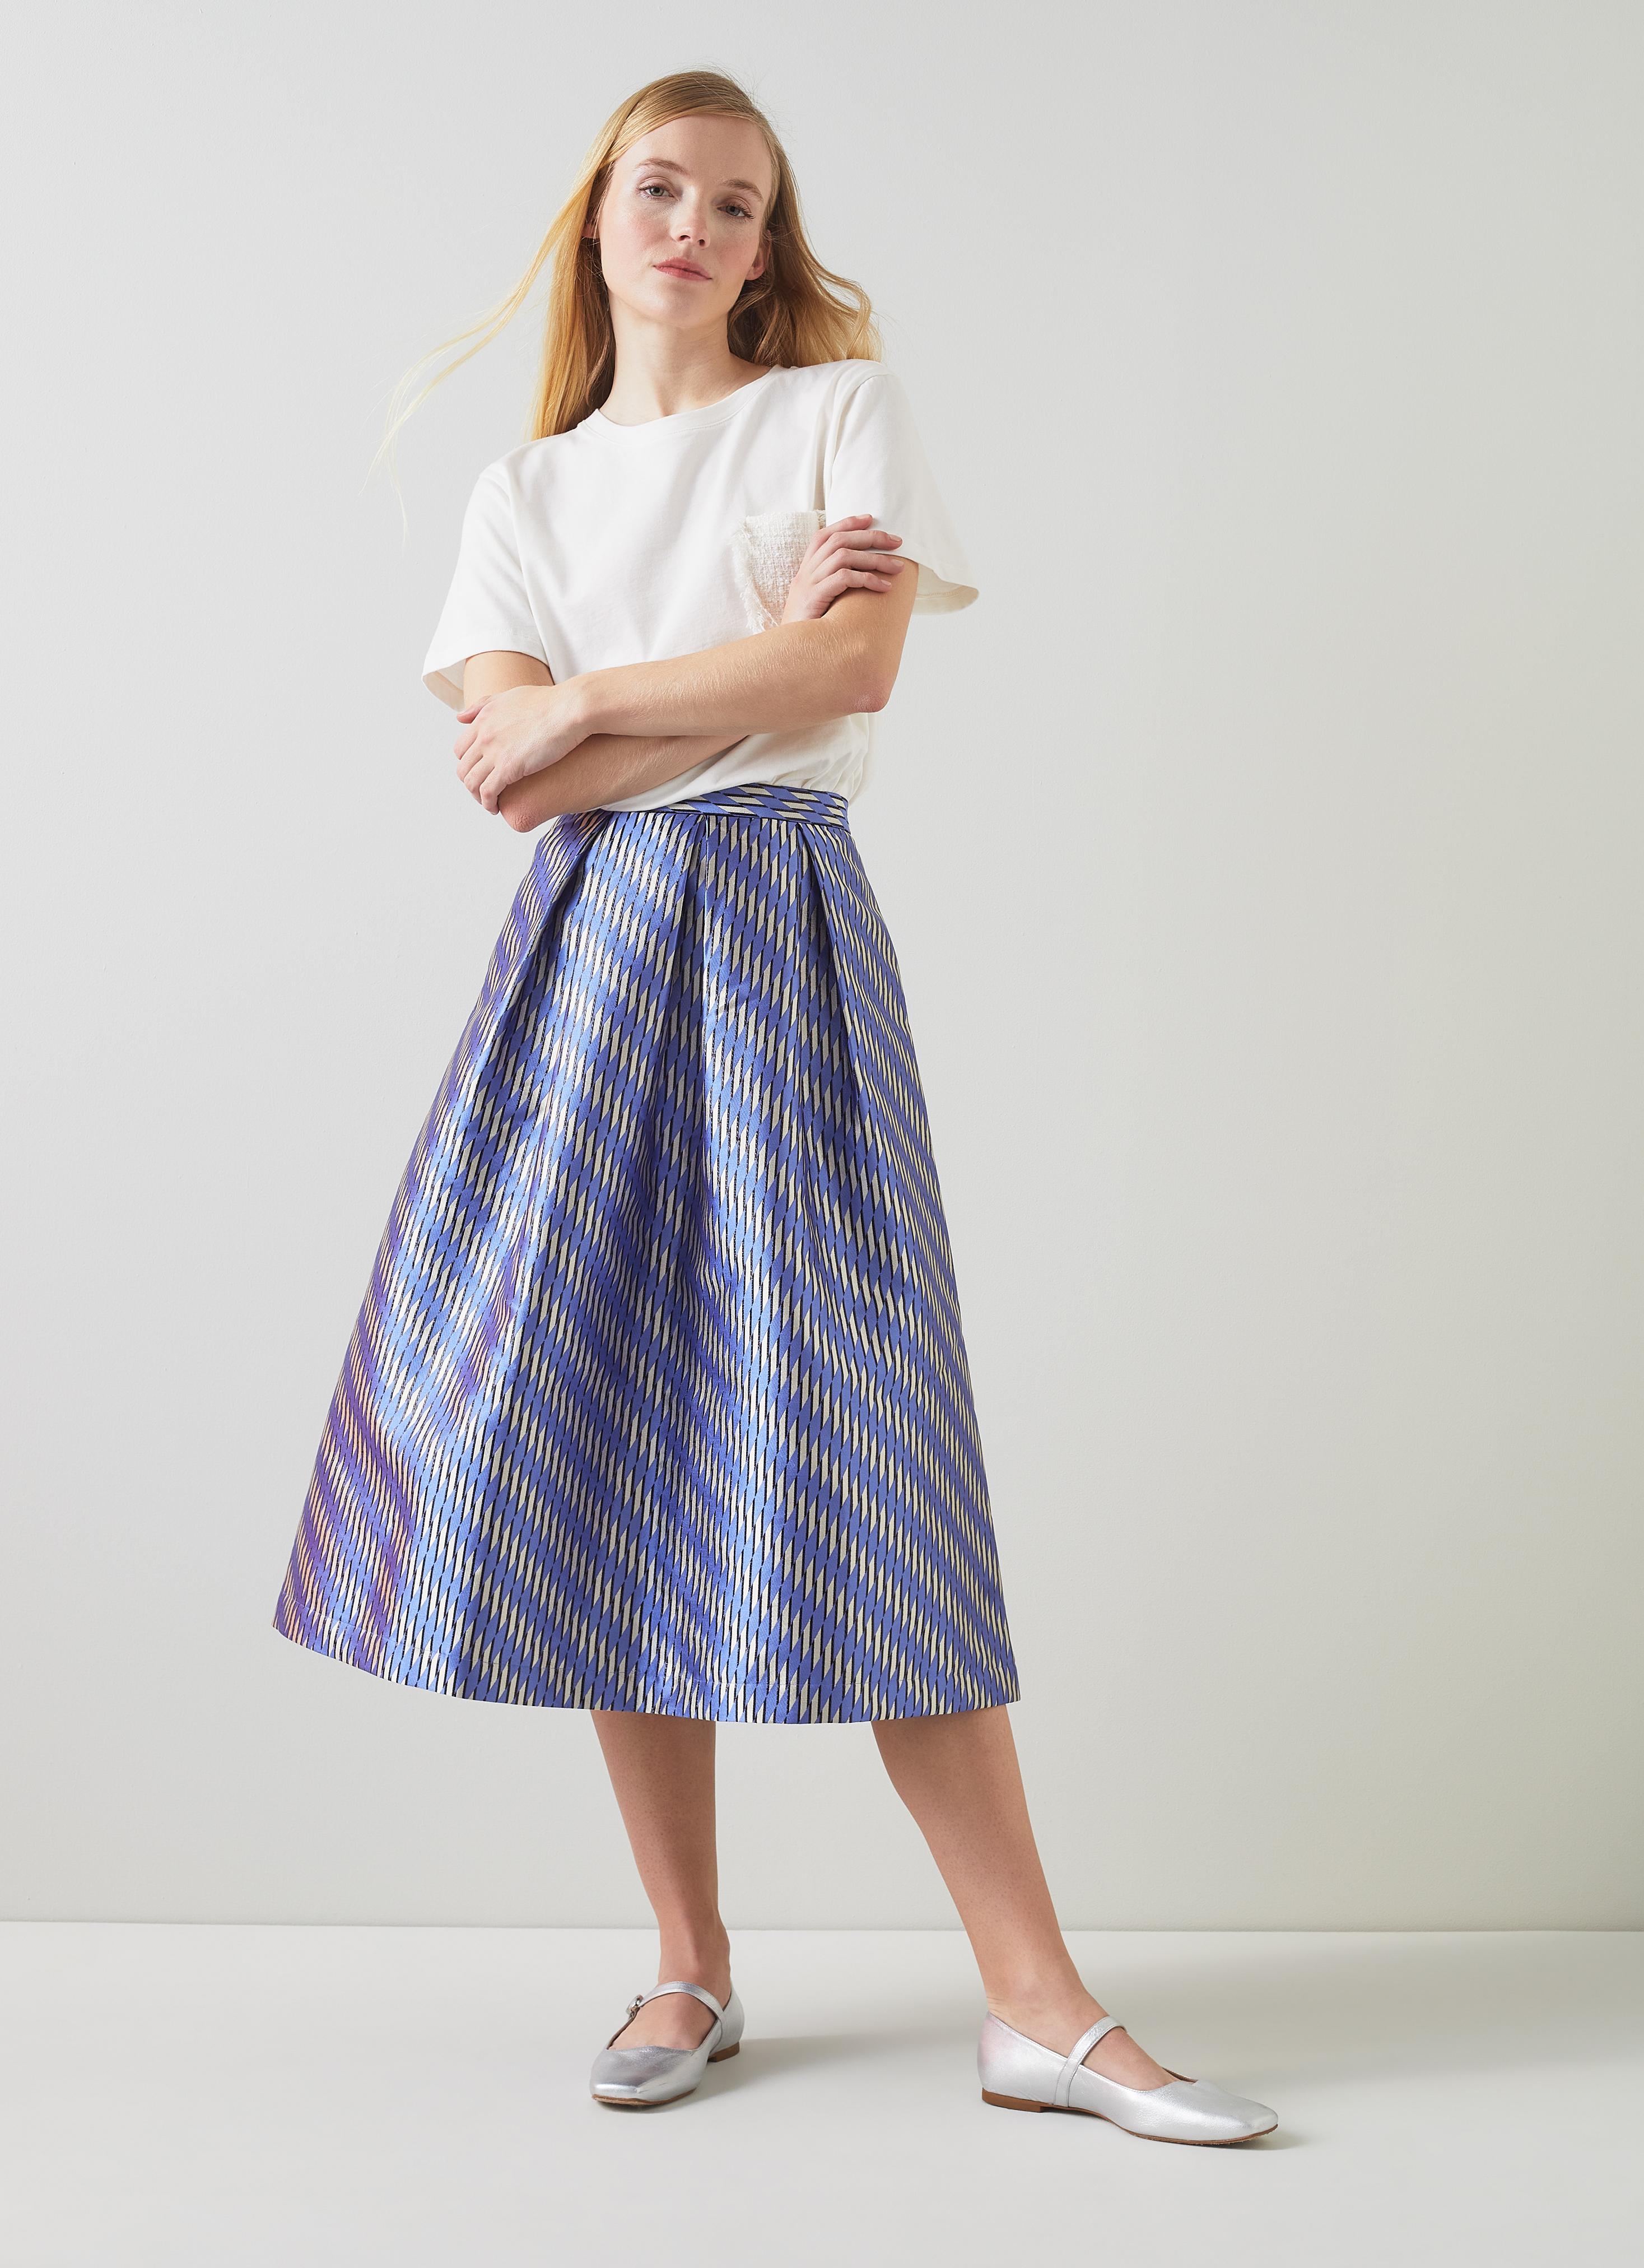 Corporate Skirts Online | Womens & Ladies Corporate Skirts Sydney - Kelly  Country Corporate